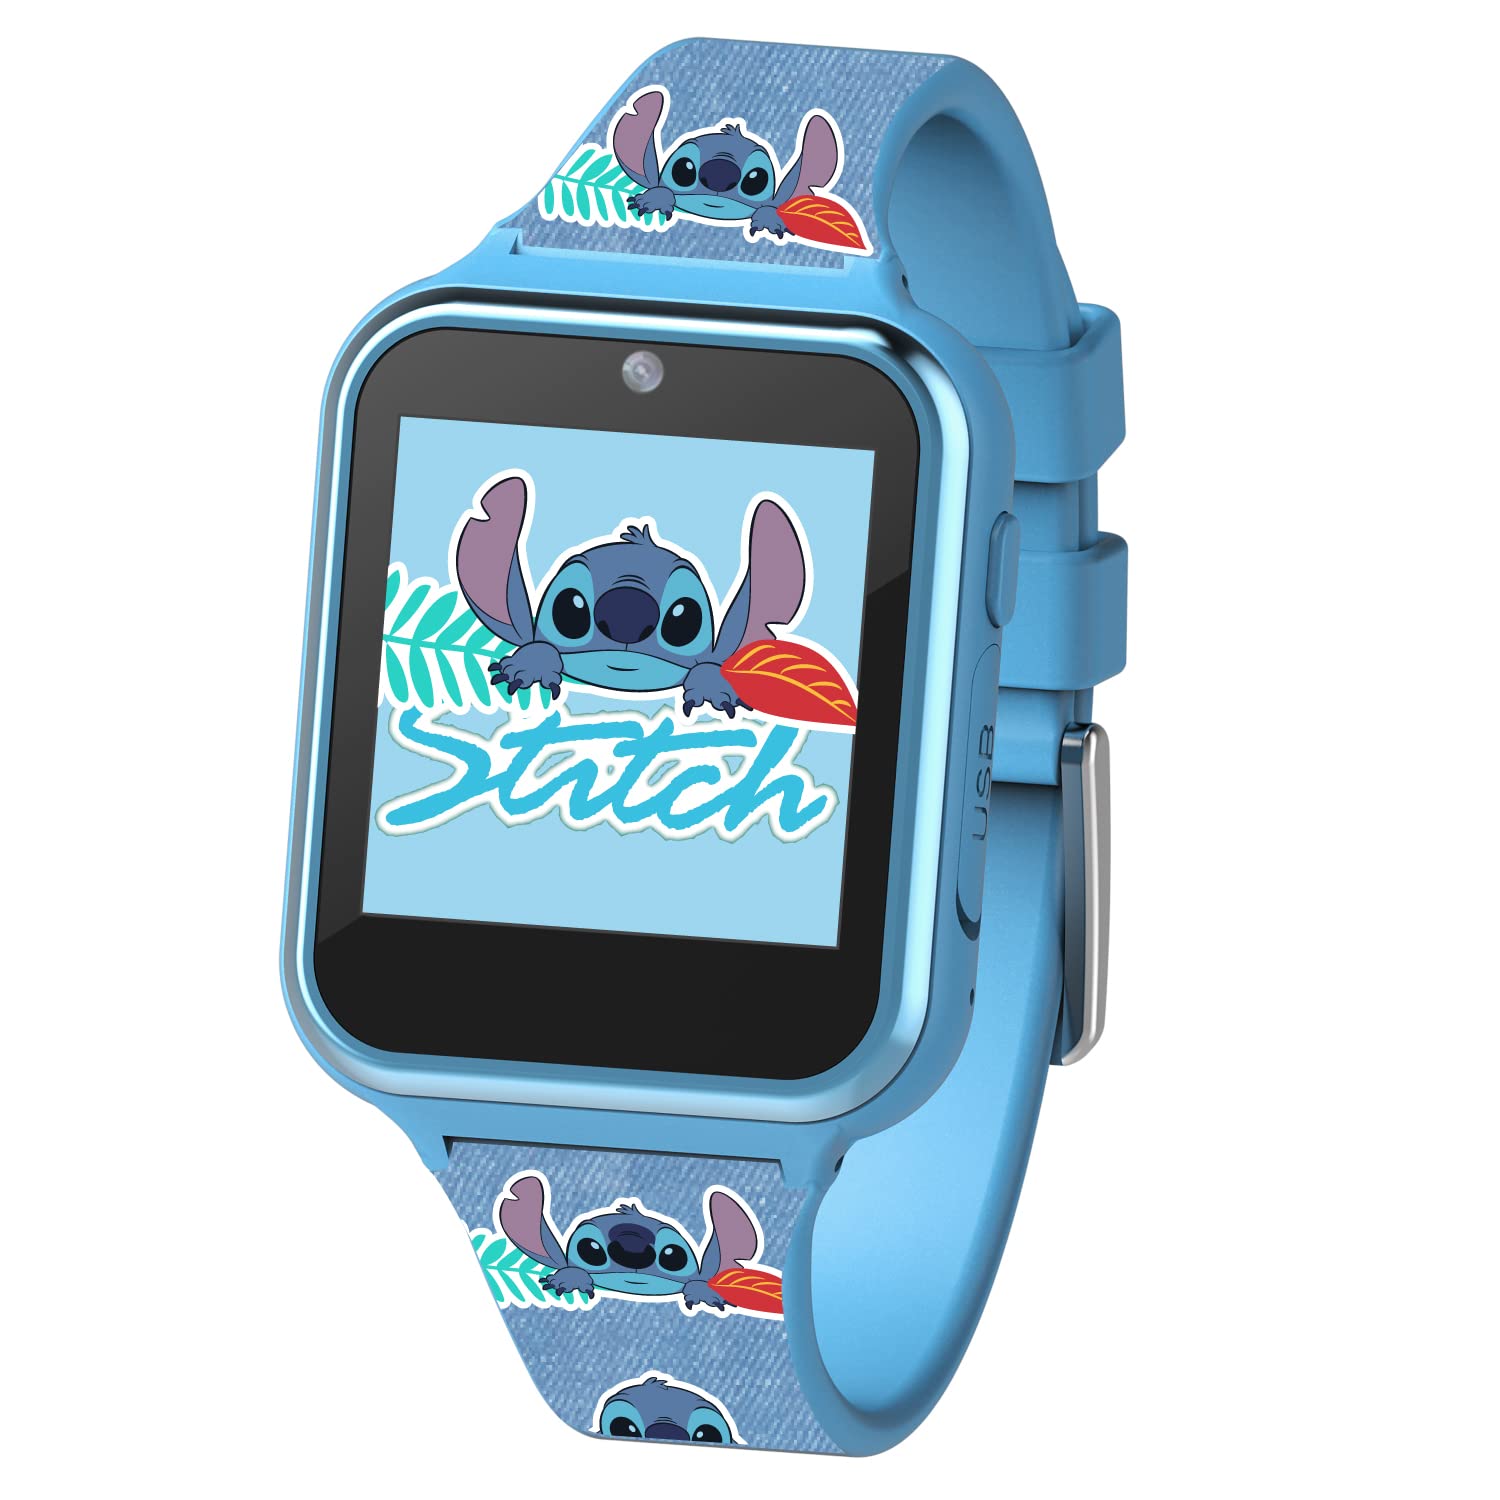 Accutime Kids Disney Lilo & Stitch Blue Educational Learning Touchscreen Smart Watch Toy for Girls, Boys, Toddlers - Selfie Cam, Learning Games, Alarm, Calculator, Pedometer & More (Model: LAS4024AZ)